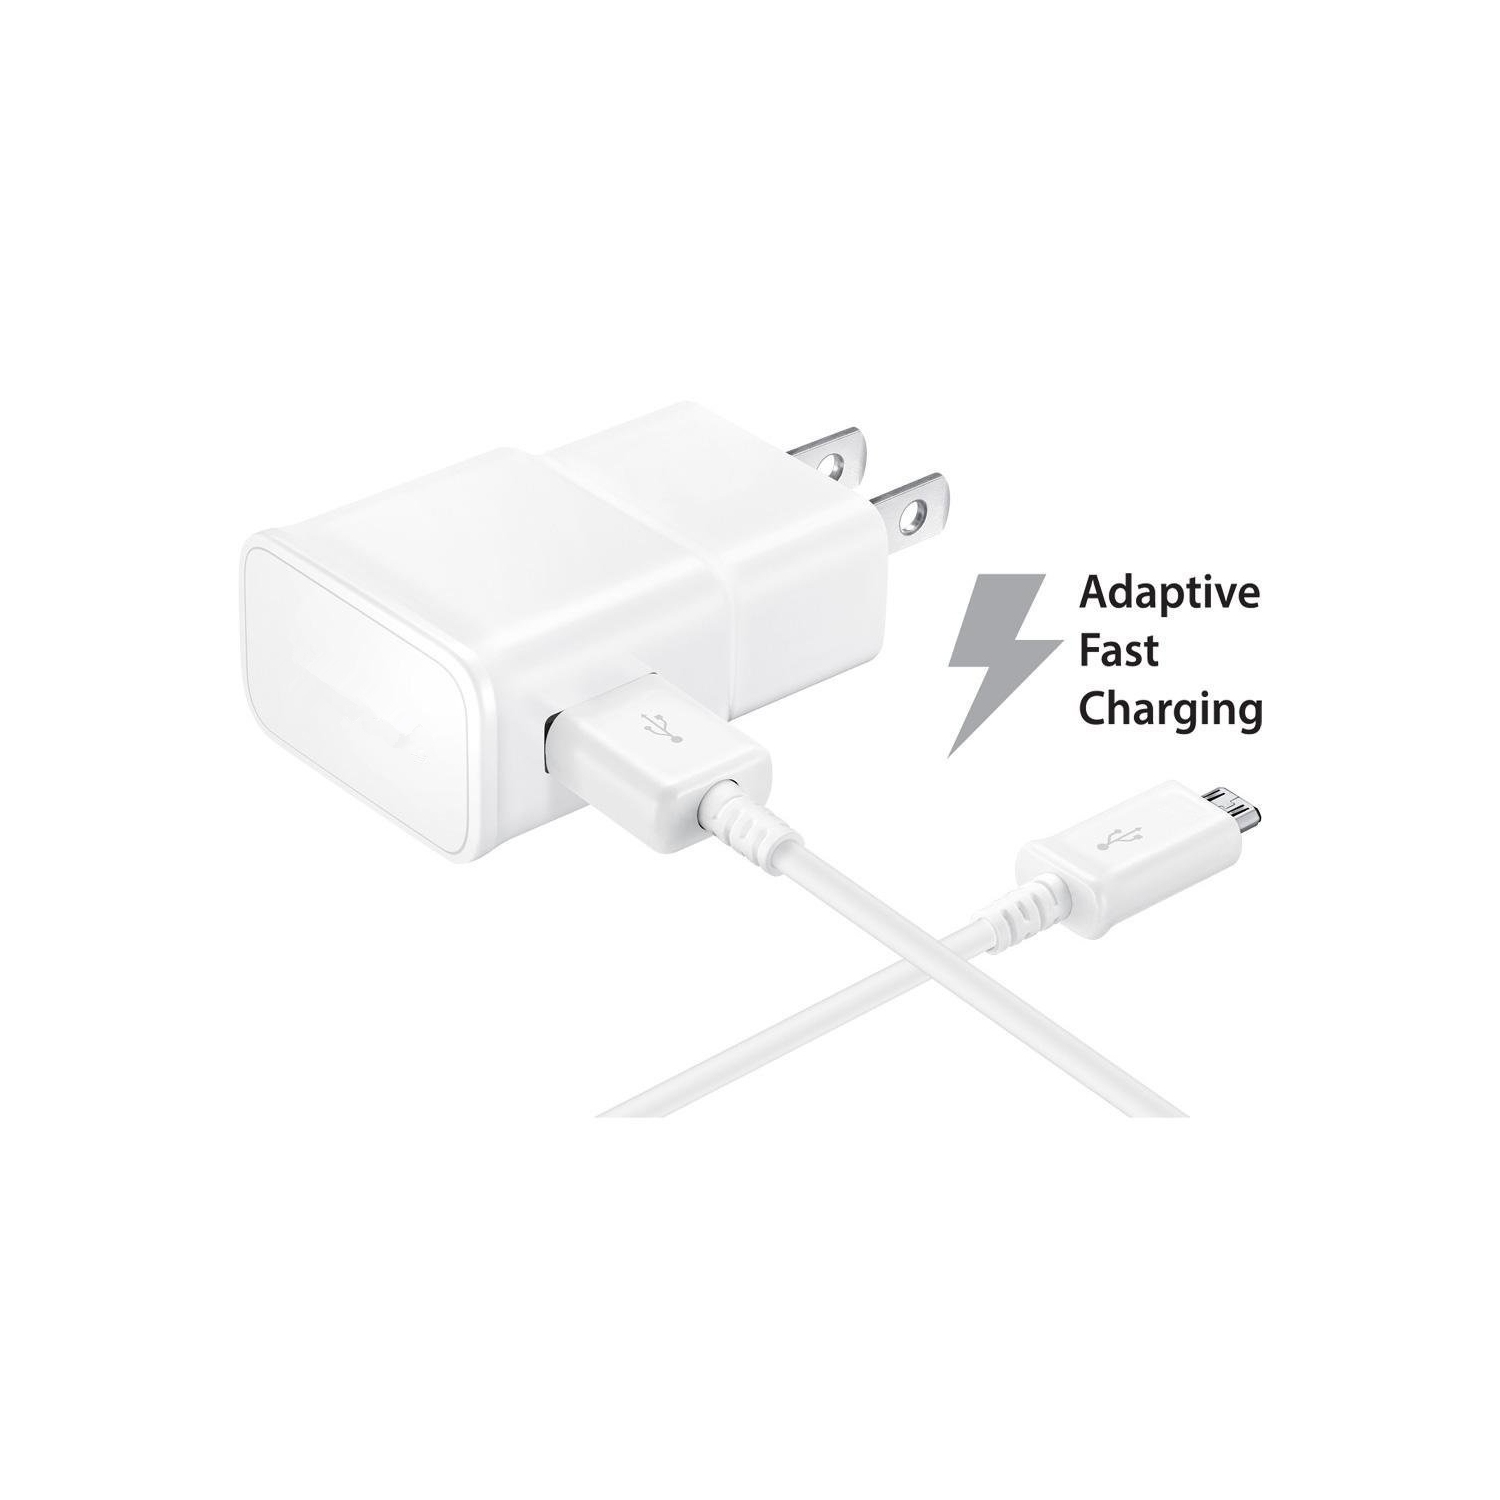 Fast Adaptive Charging Wall Charger Adapter + 1m Micro USB Cable for Samsung Galaxy S4 S6 S7 Edge Plus Note 2 4 Alpha, White